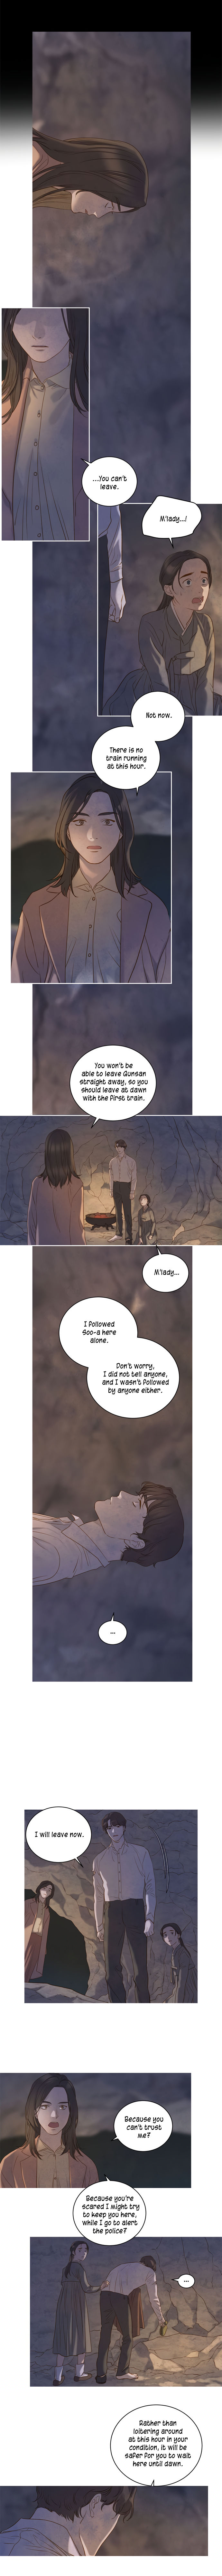 Gorae Byul - The Gyeongseong Mermaid - Chapter 5 Page 5